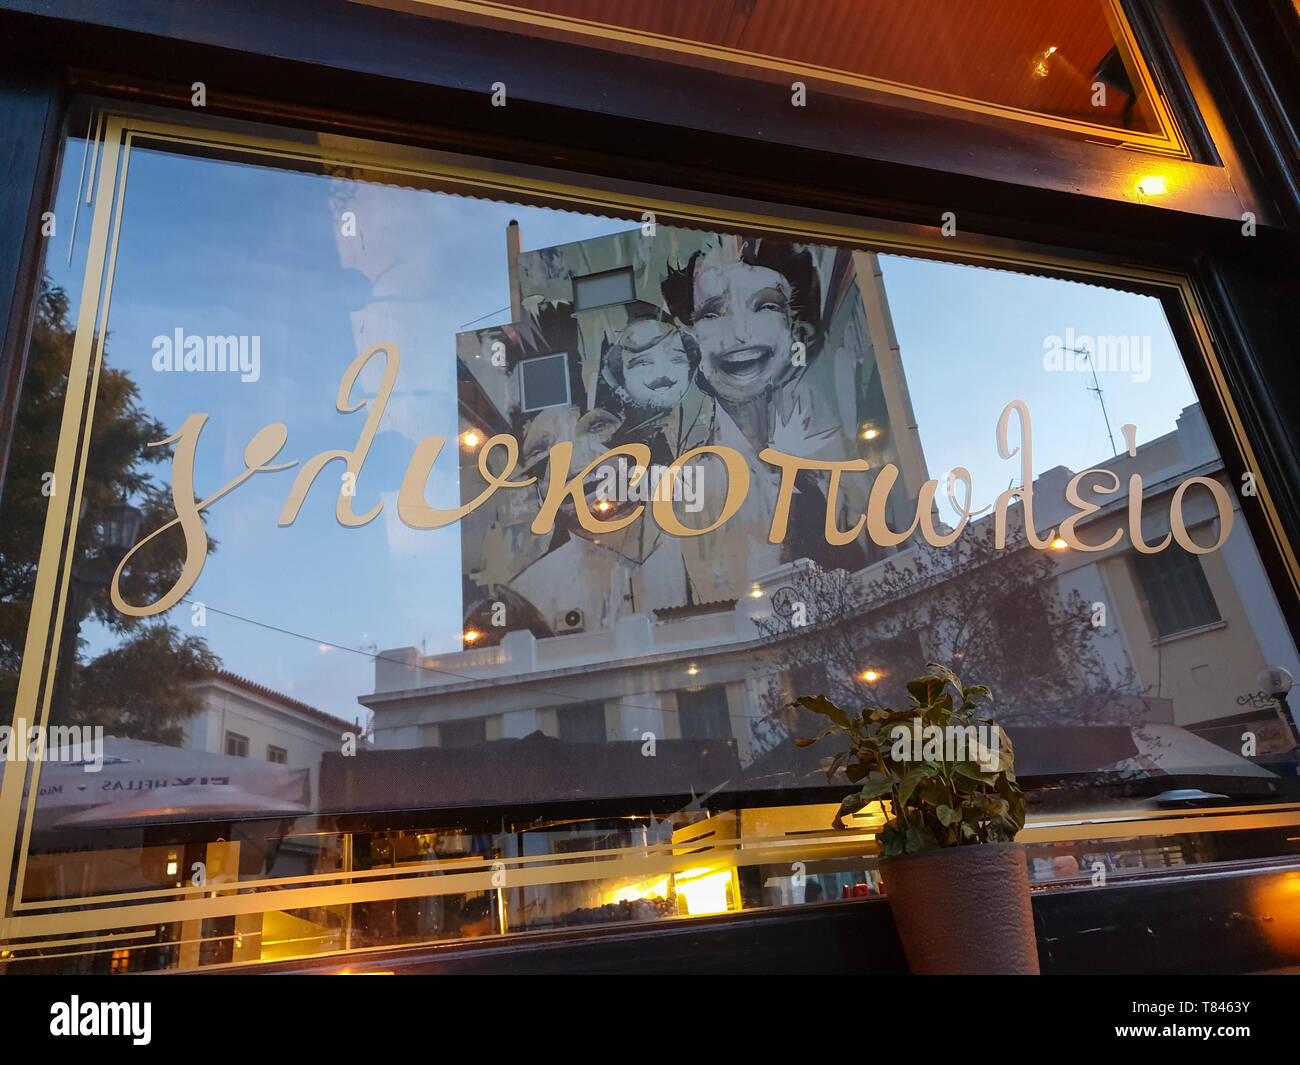 Athens, Greece - March 9, 2019: Reflection in a pastry shop window of graffiti on a building facade in Heroes' square in Psirri neighborhood of centra Stock Photo